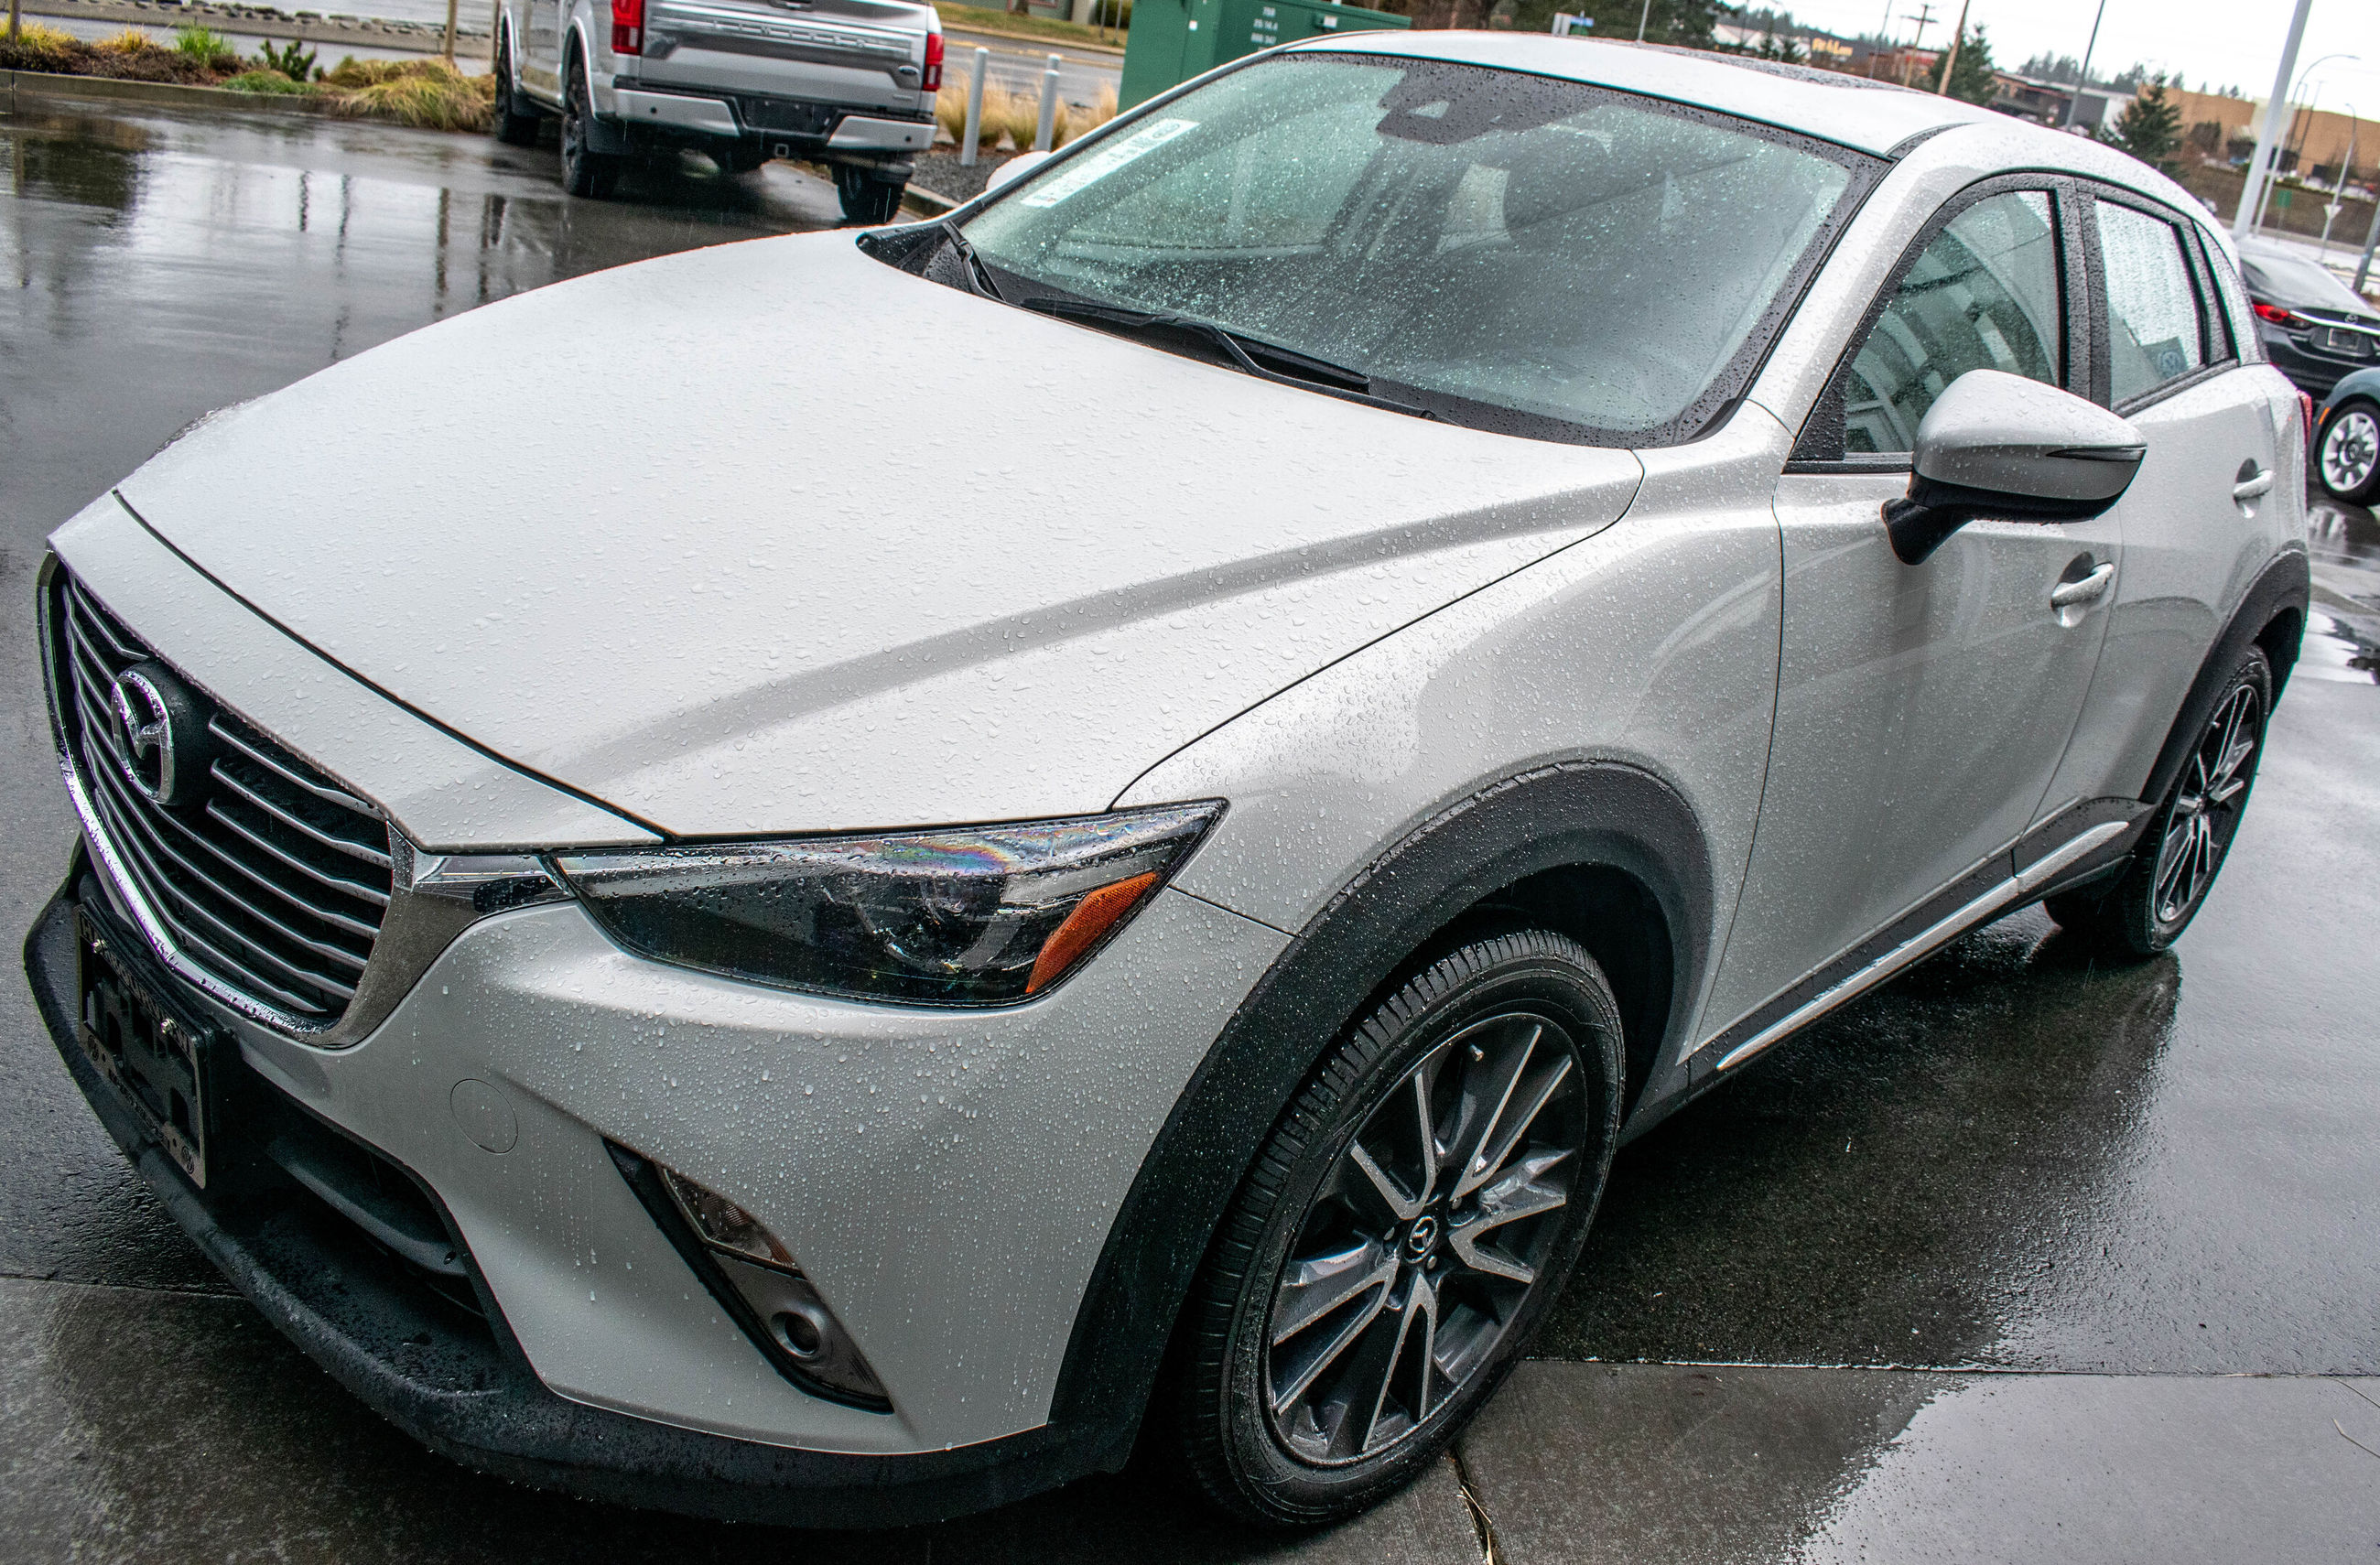 Used 2018 Mazda CX 3 GT 6 Speed SKYACTIV Drive Automatic AWD for Sale 